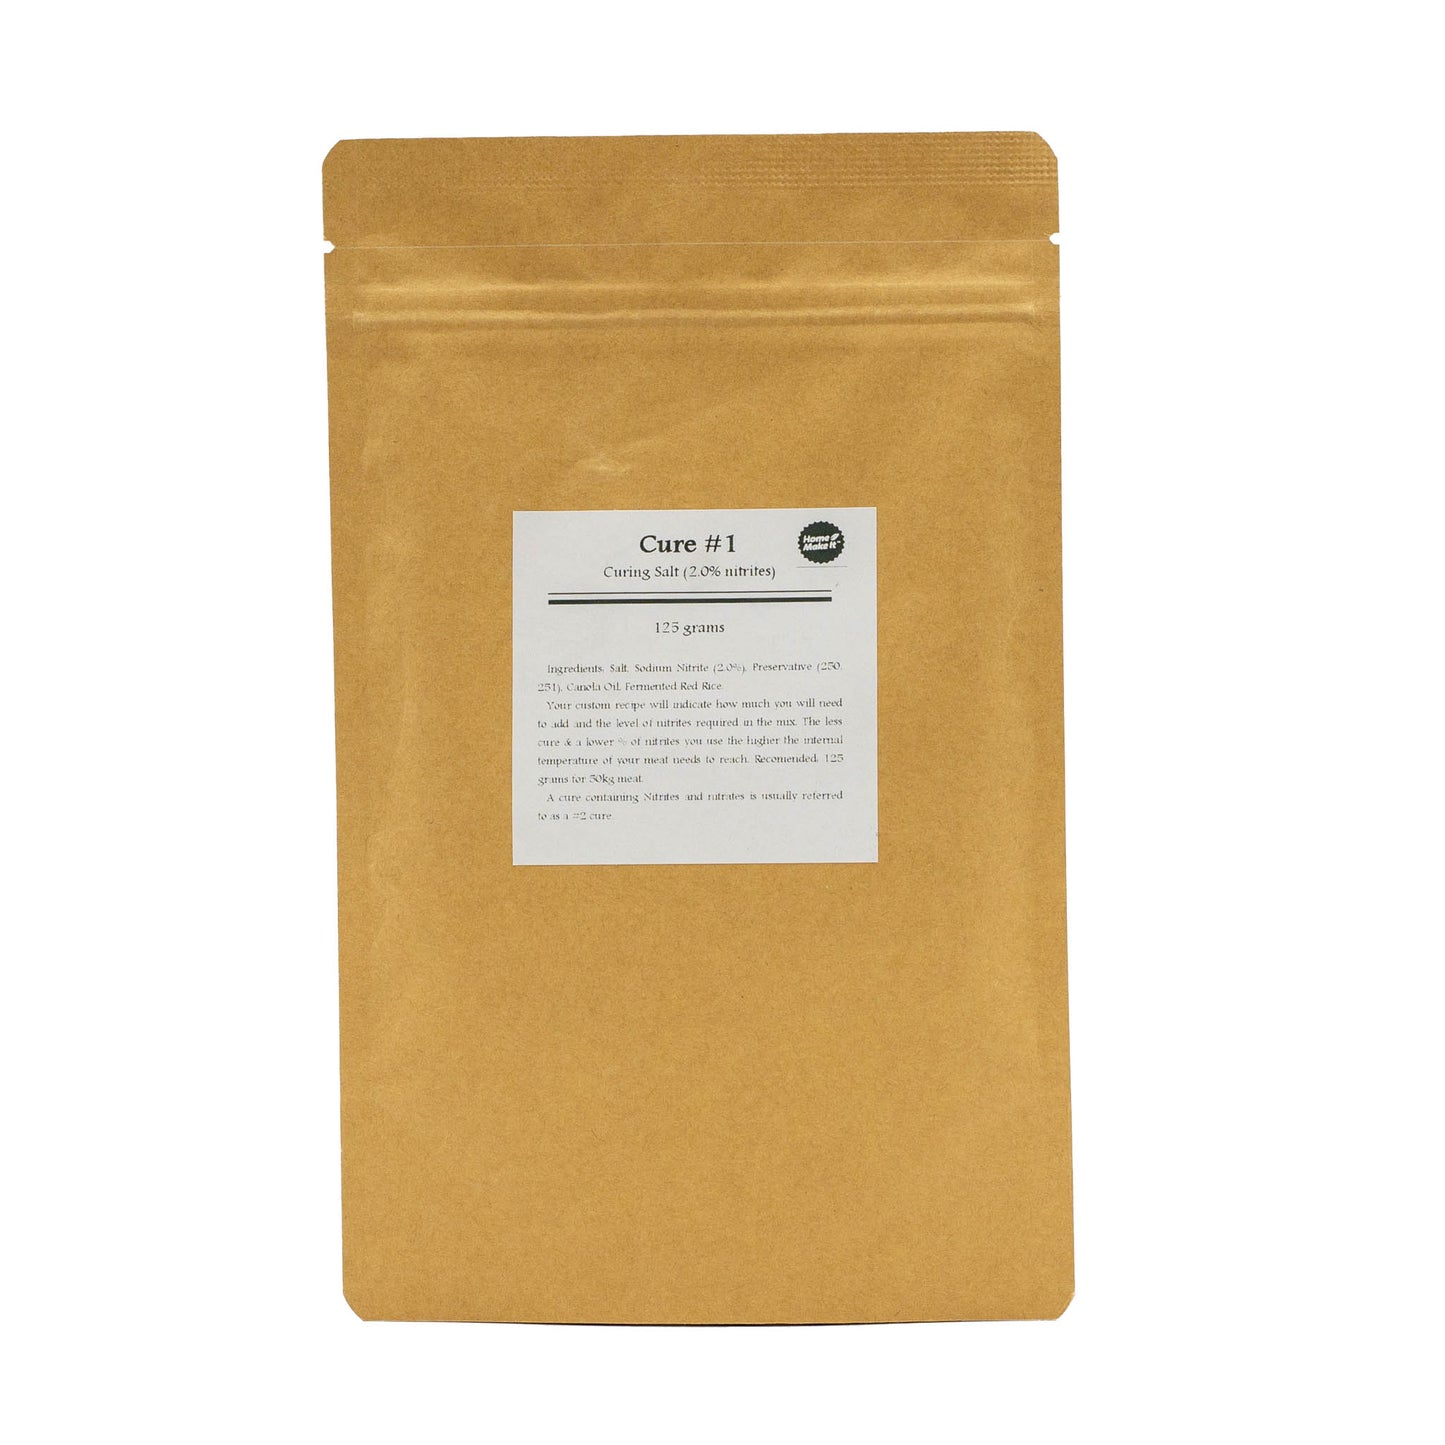 250g bag of Cure #1 with 2% nitrites required for safe processing of semi dried meats such as jerky, bacon and sausages that are heat treated in a smoker or oven.